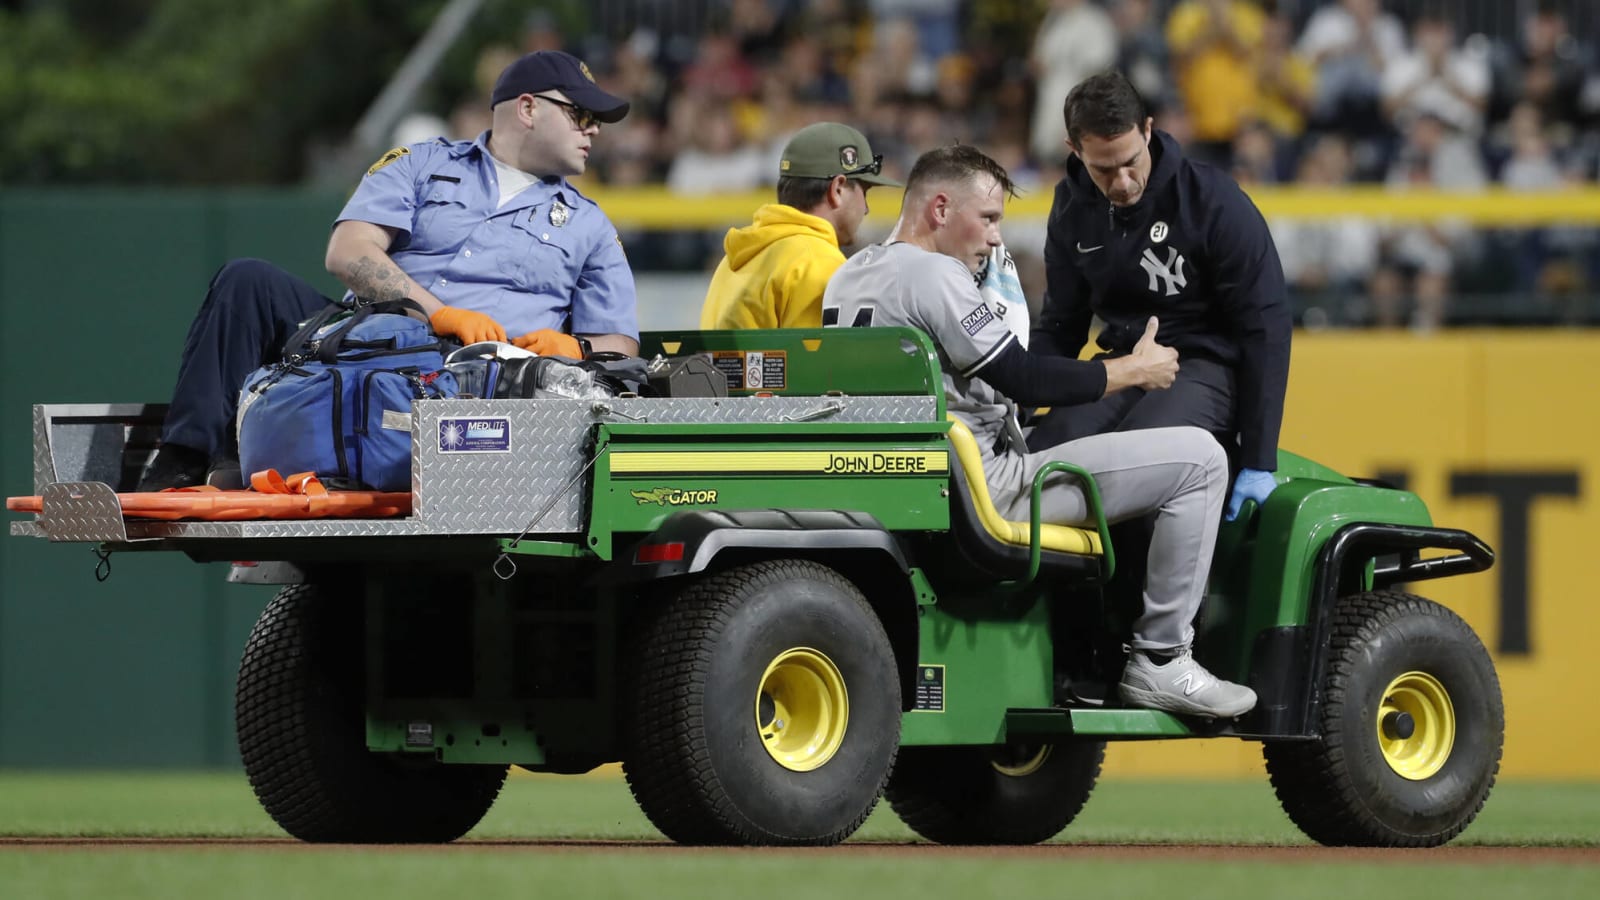 After Loss to Yankees, Pirates Shift Focus to Injured Misiewicz